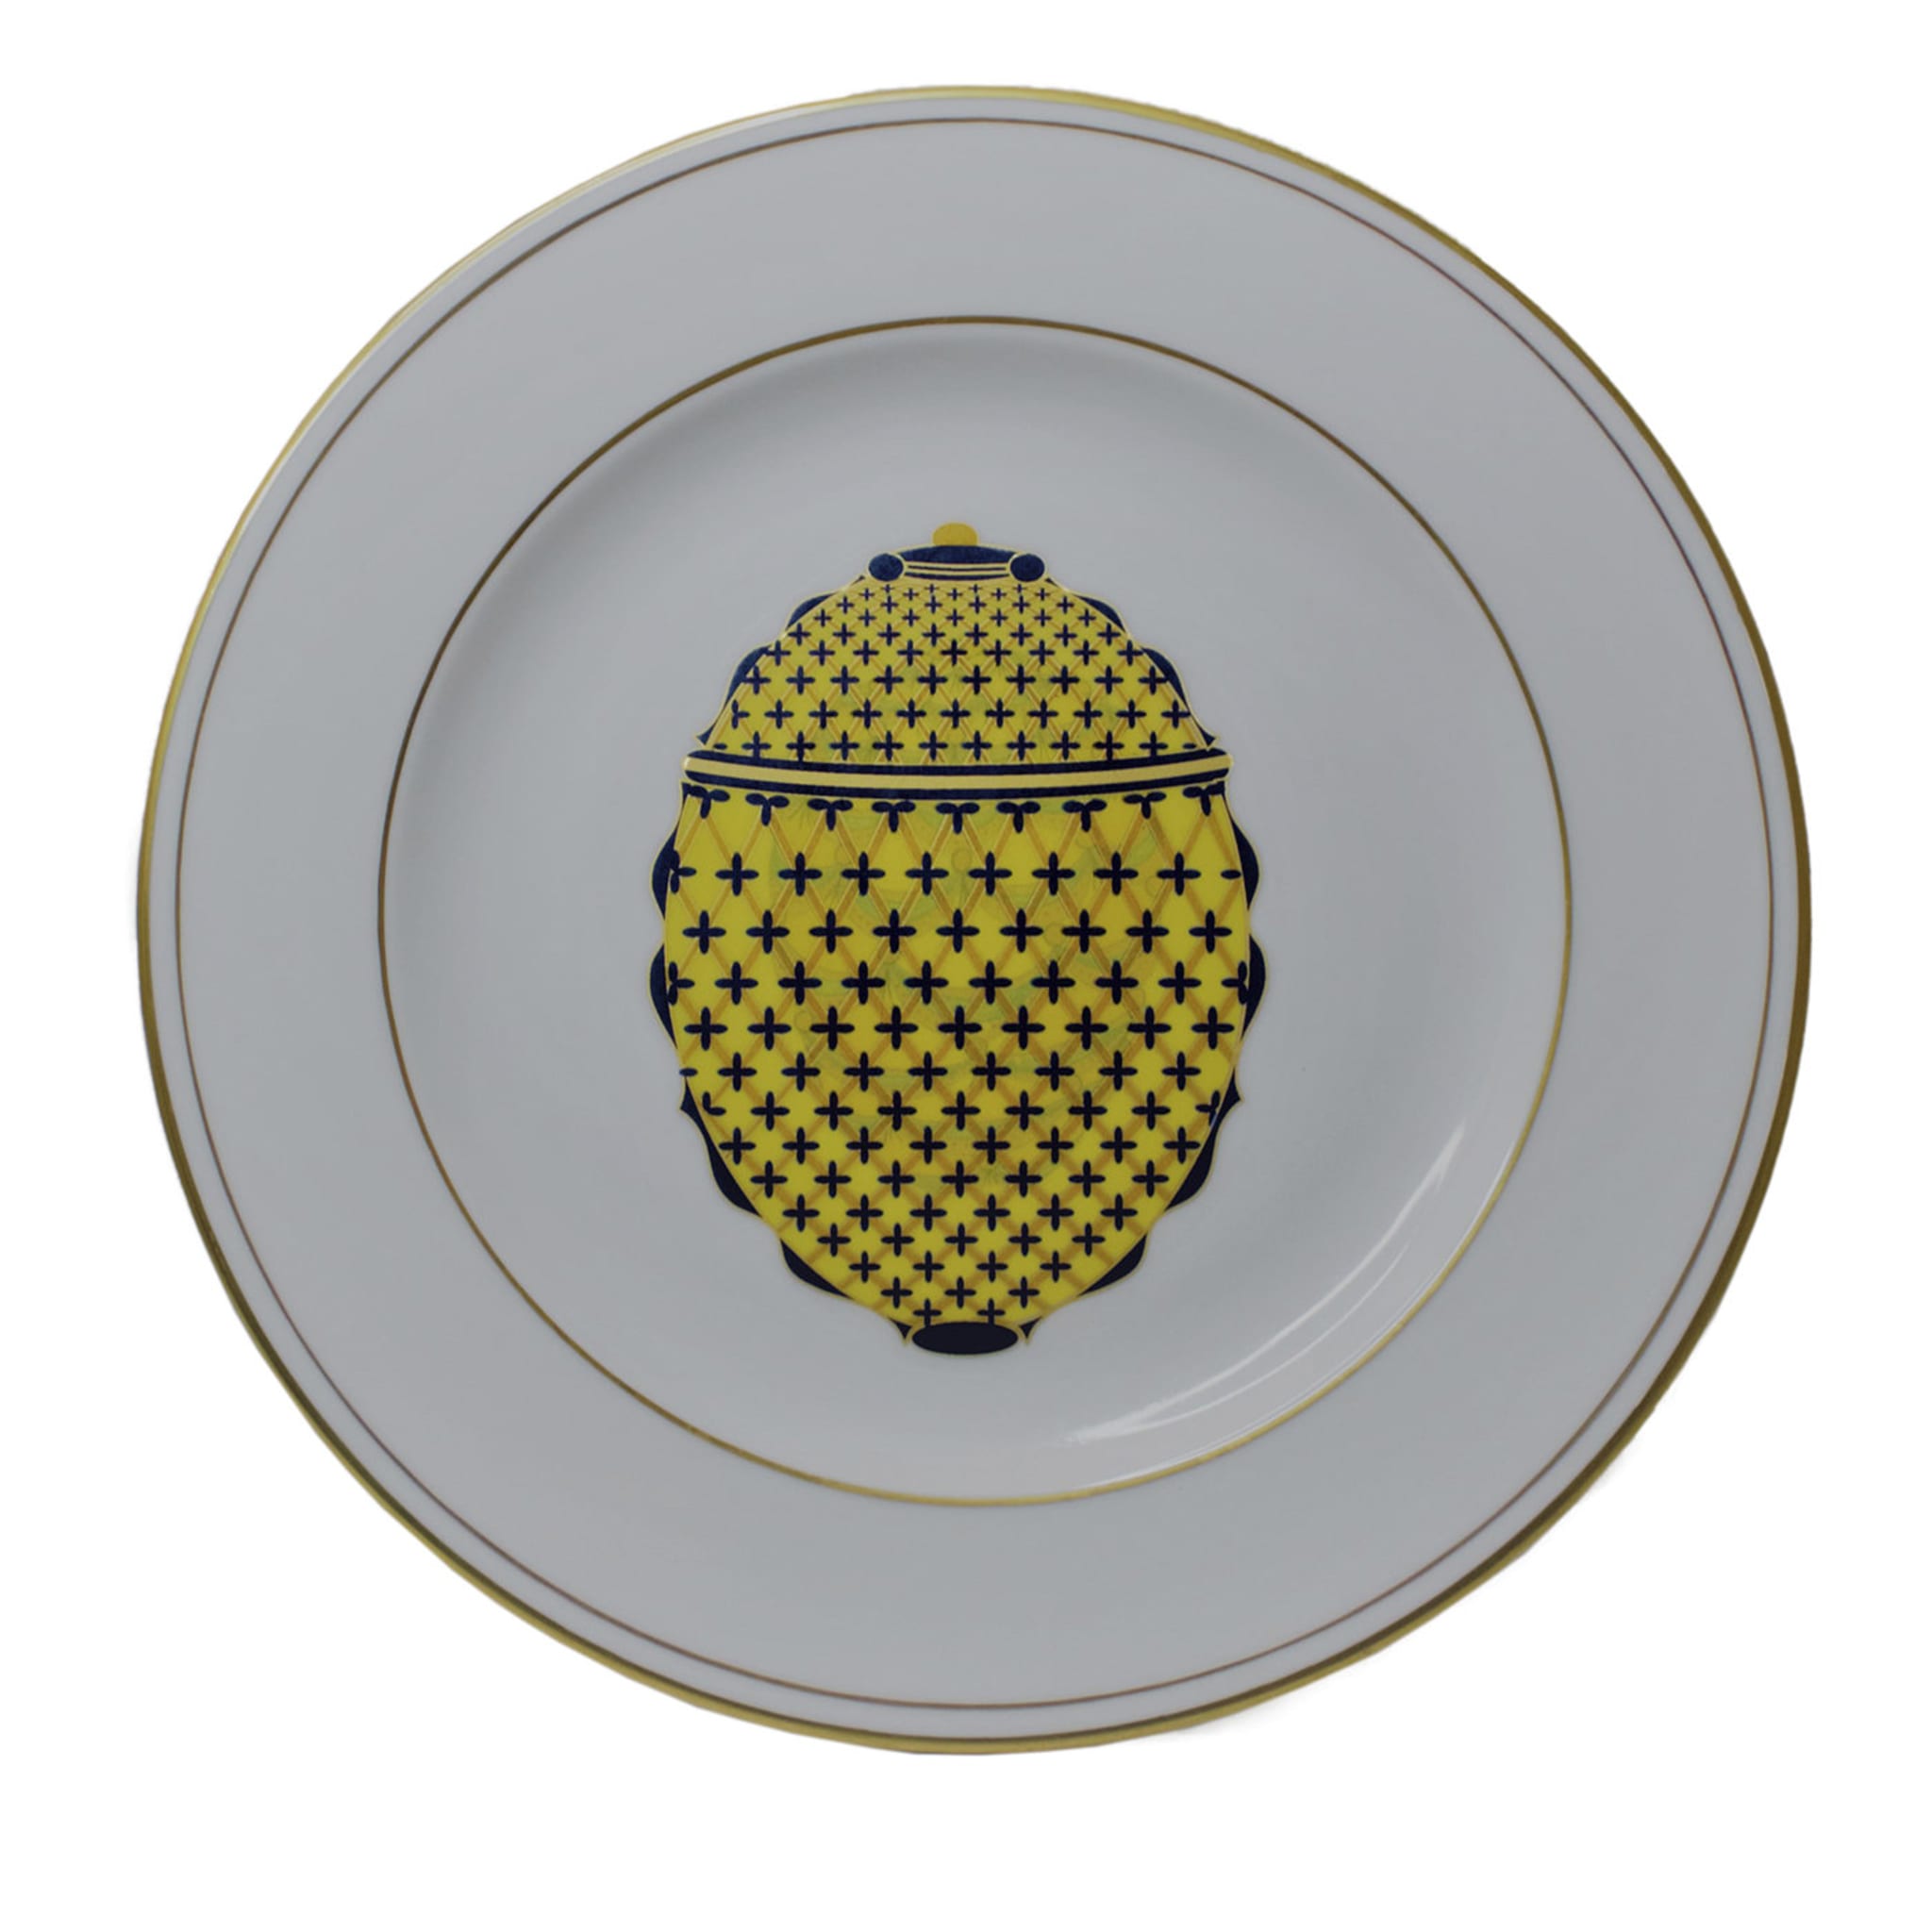 UOVO Yellow Plate 21.5 cm - Set of 3 - Main view